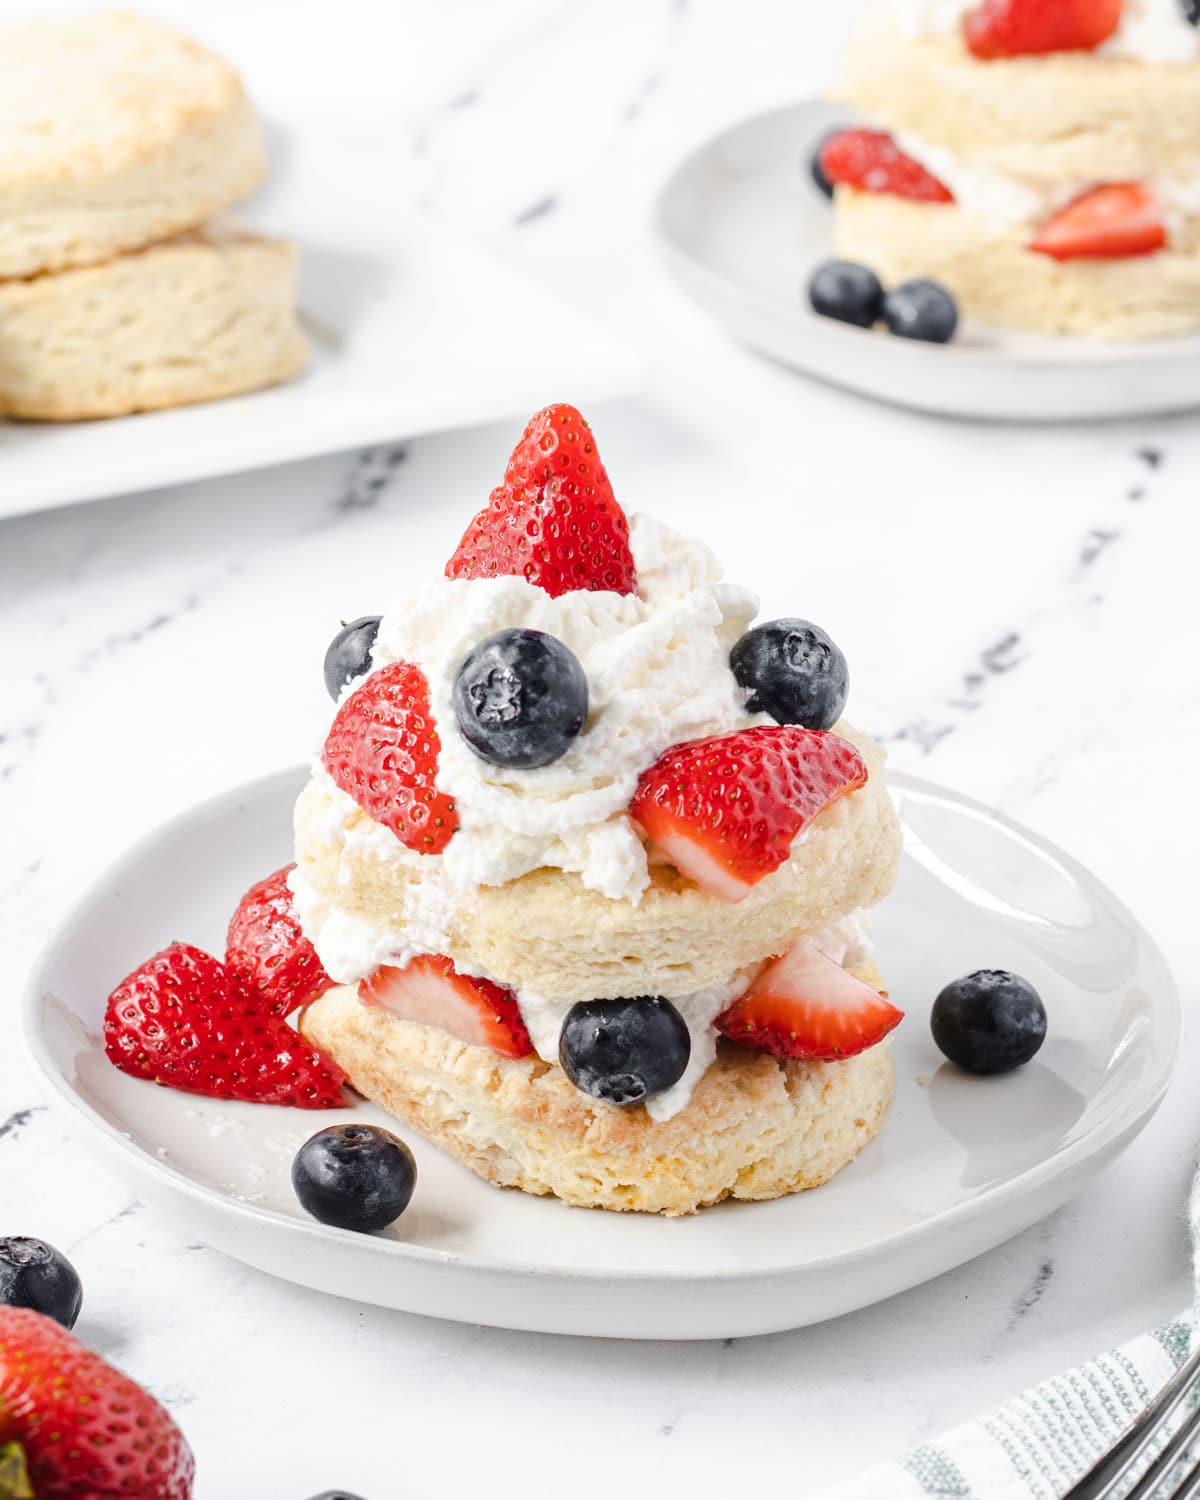 Shortcakes layered with whipped cream, strawberries, and blueberries. A tray of shortcakes and second plate of blueberry strawberry shortcake is in the background.